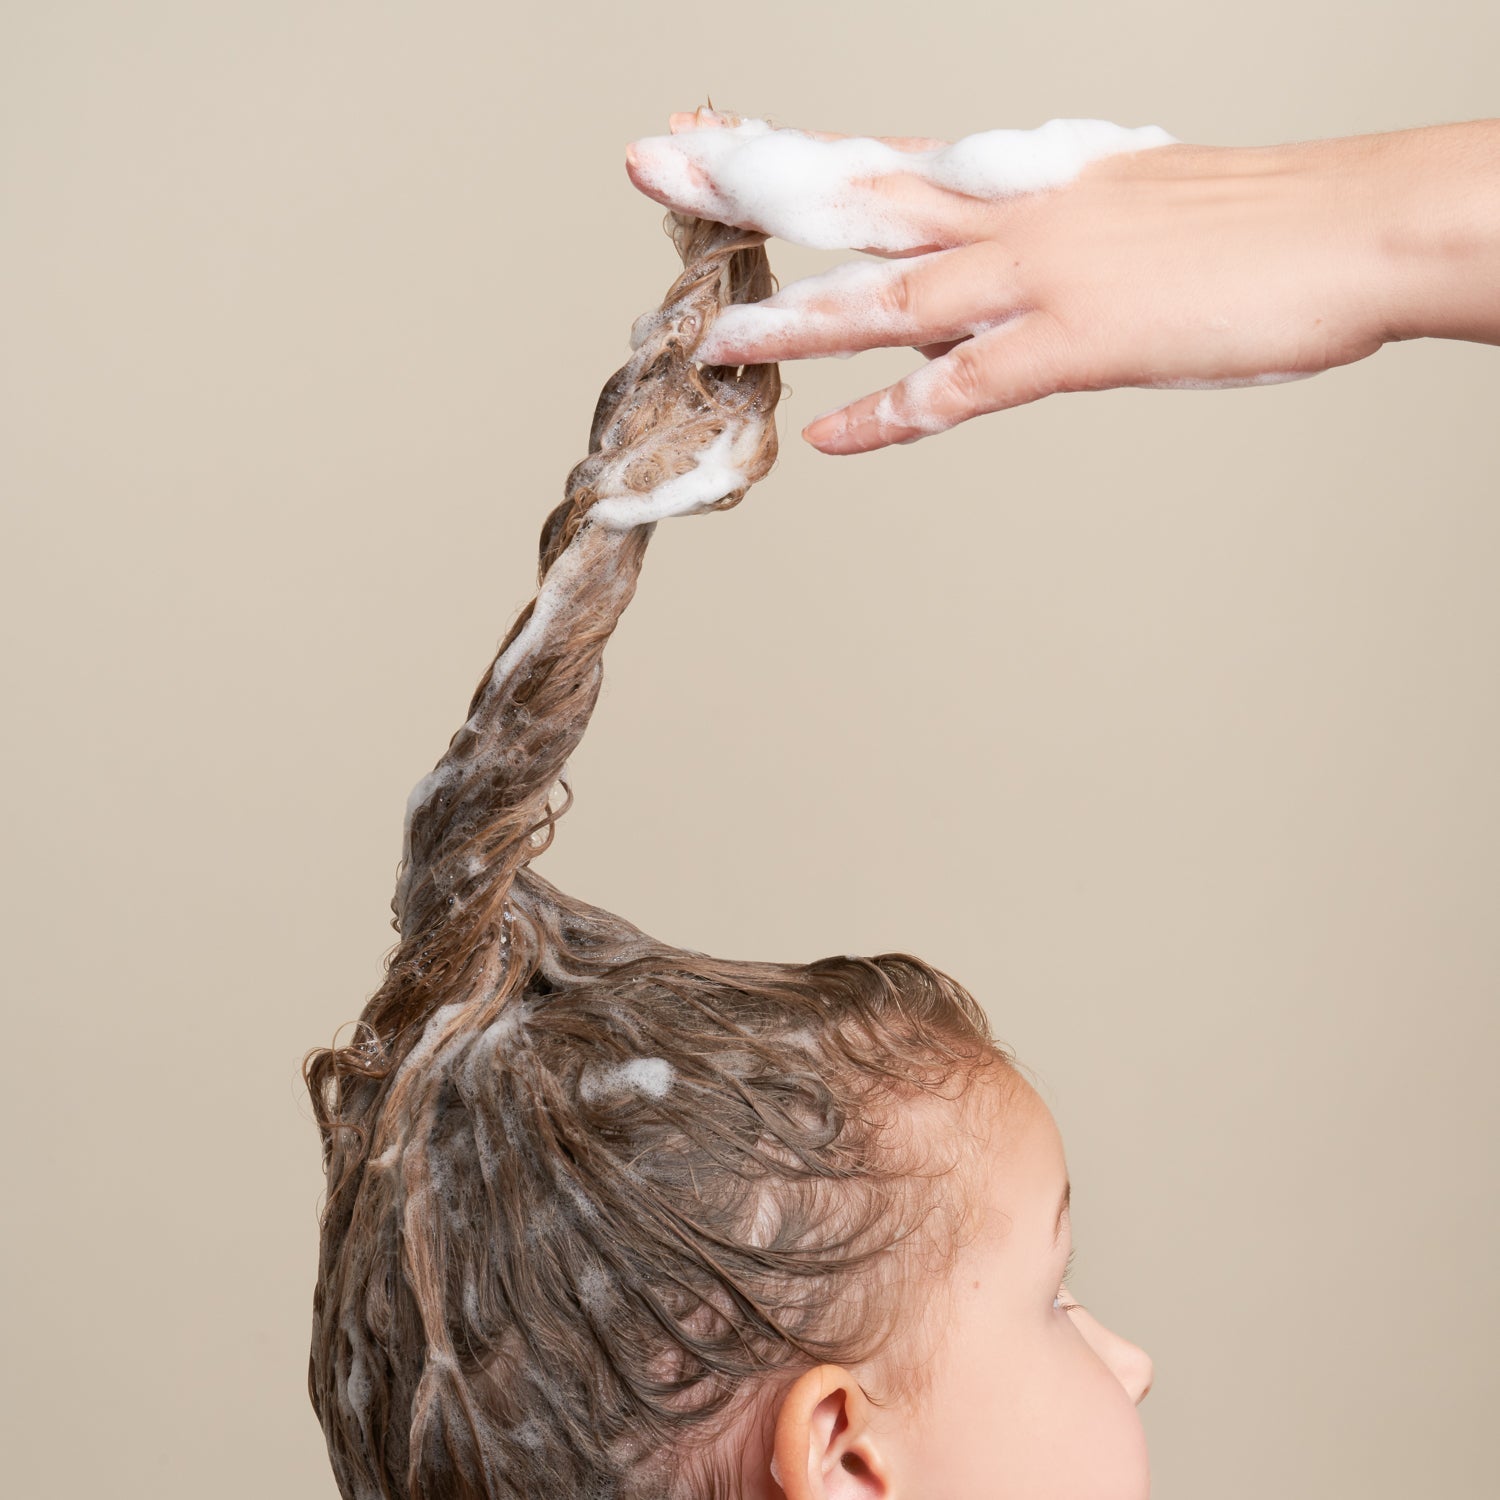 20 Reasons to Switch Your Kid's Shampoo to Natural Shampoo Bars